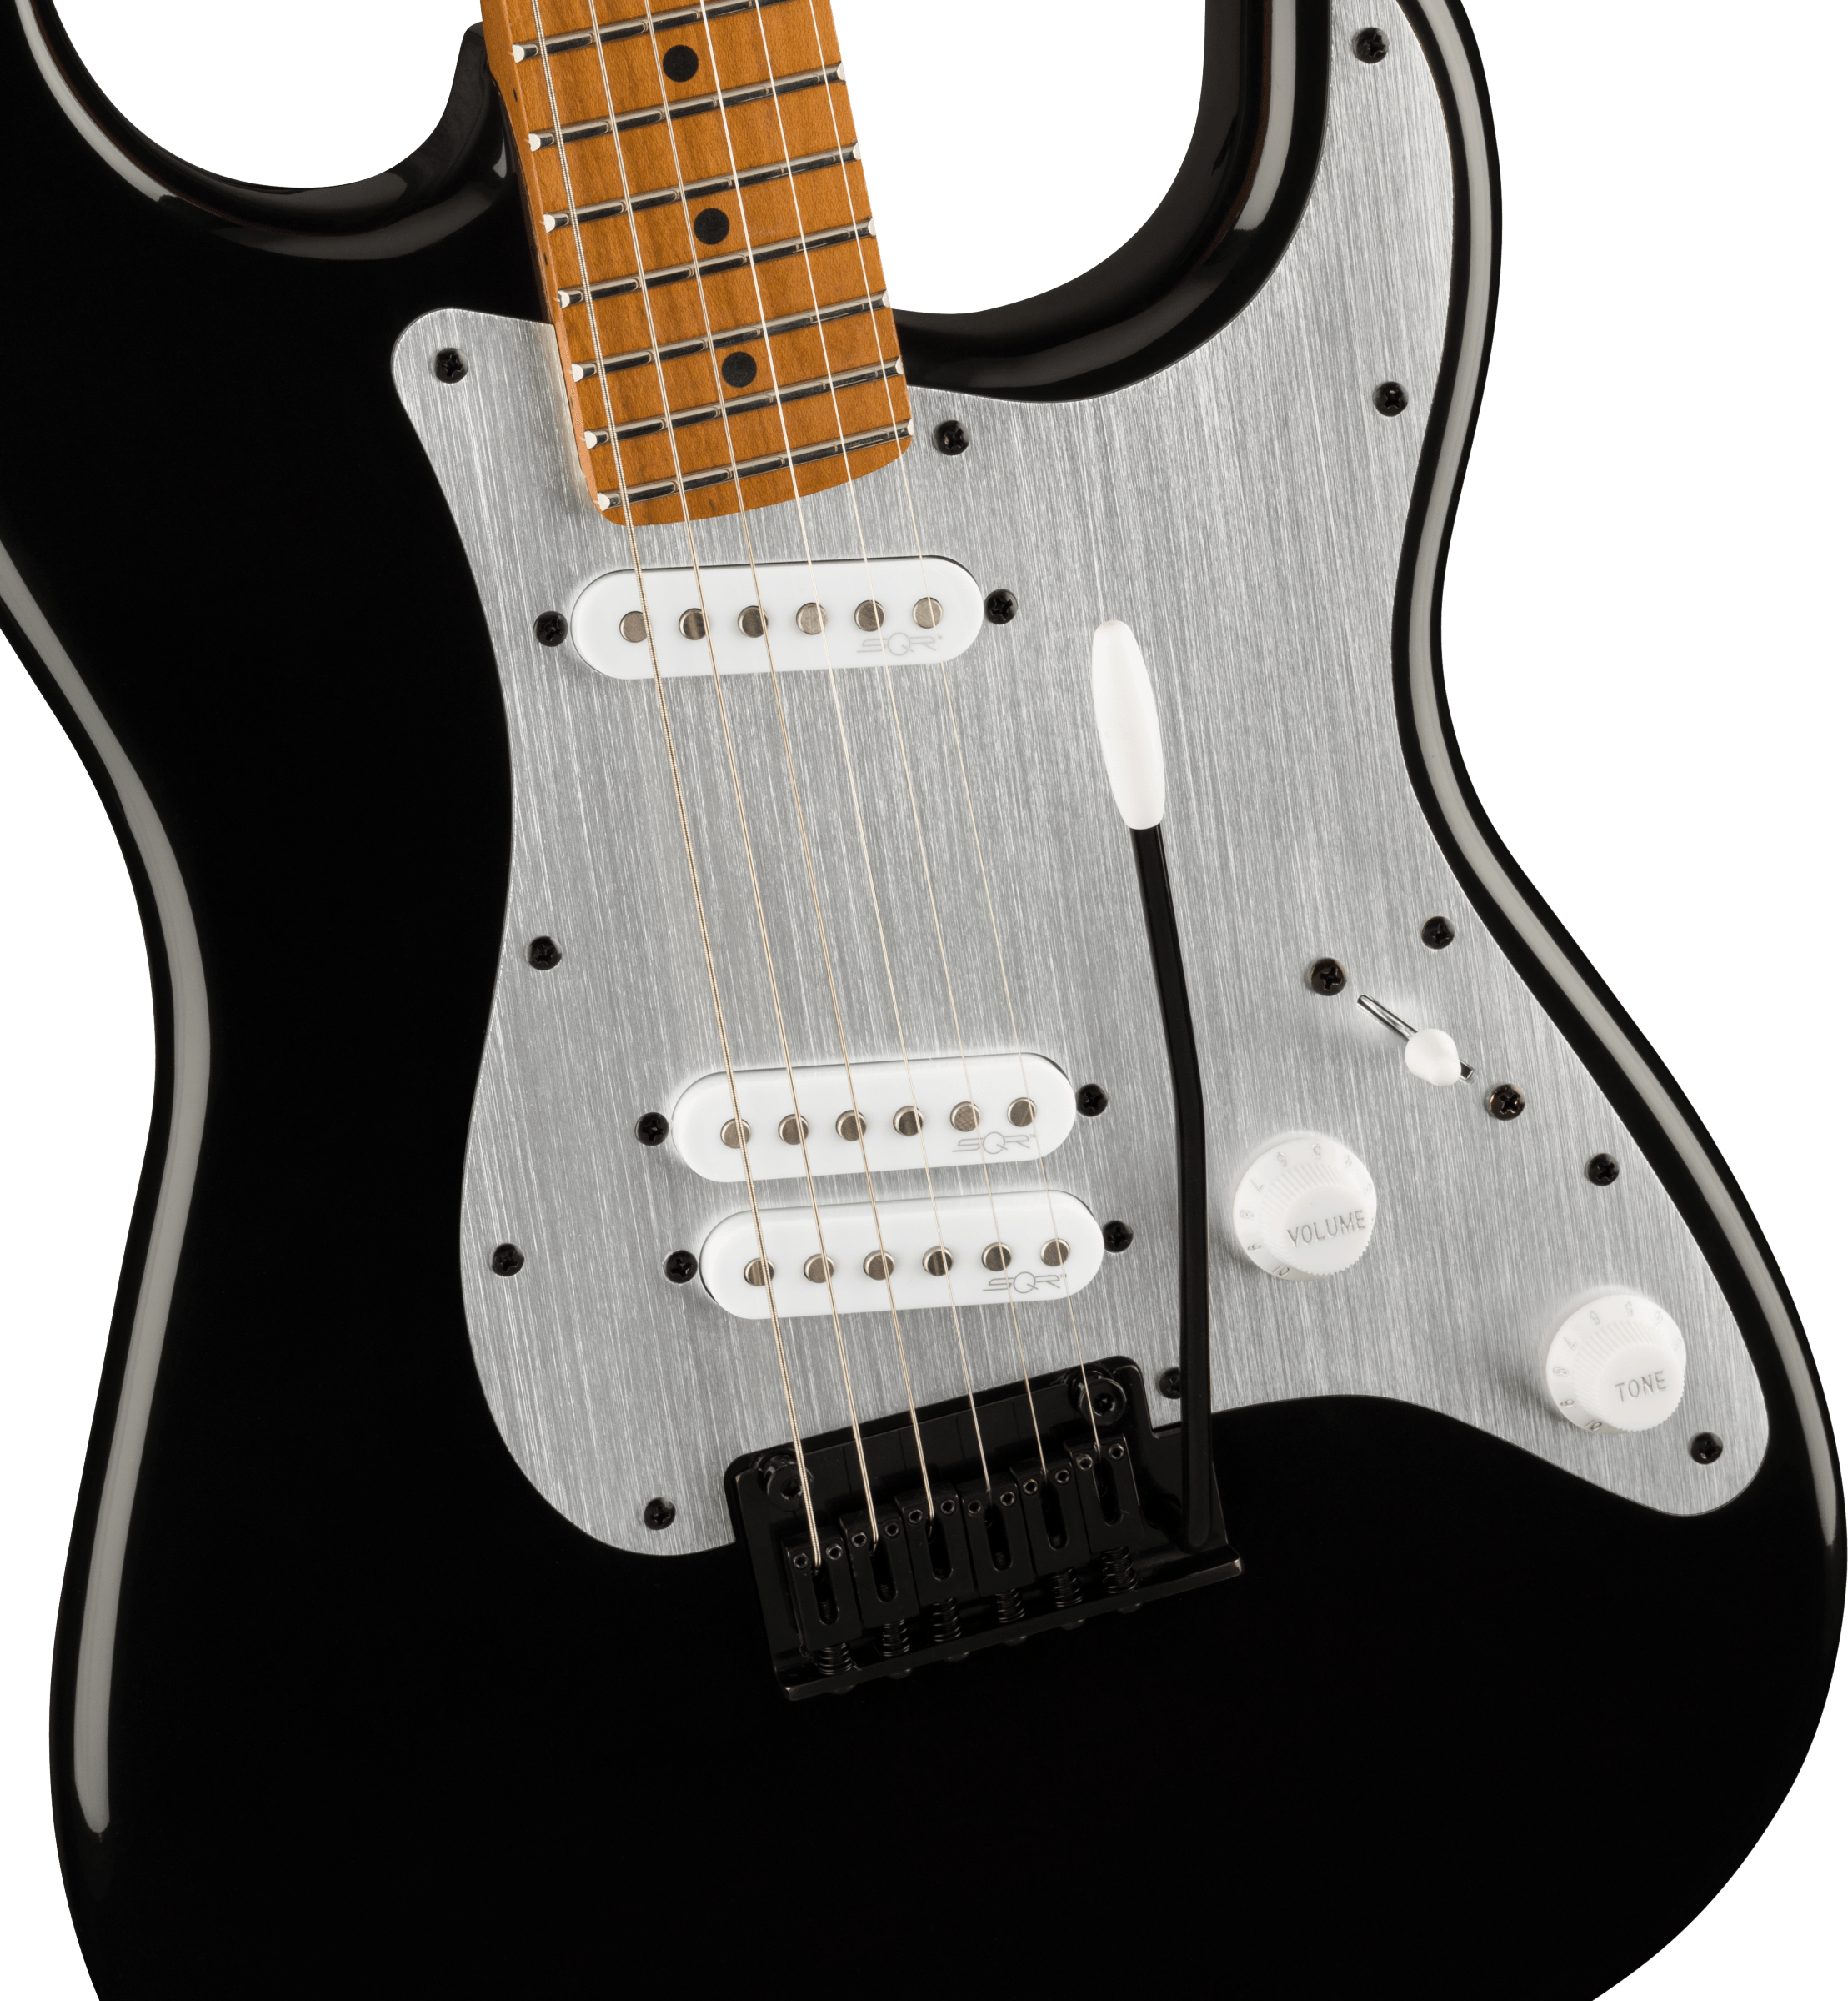 Contemporary Stratocaster Special Roasted Maple Fingerboard, Silver Anodized Pickguard, Black